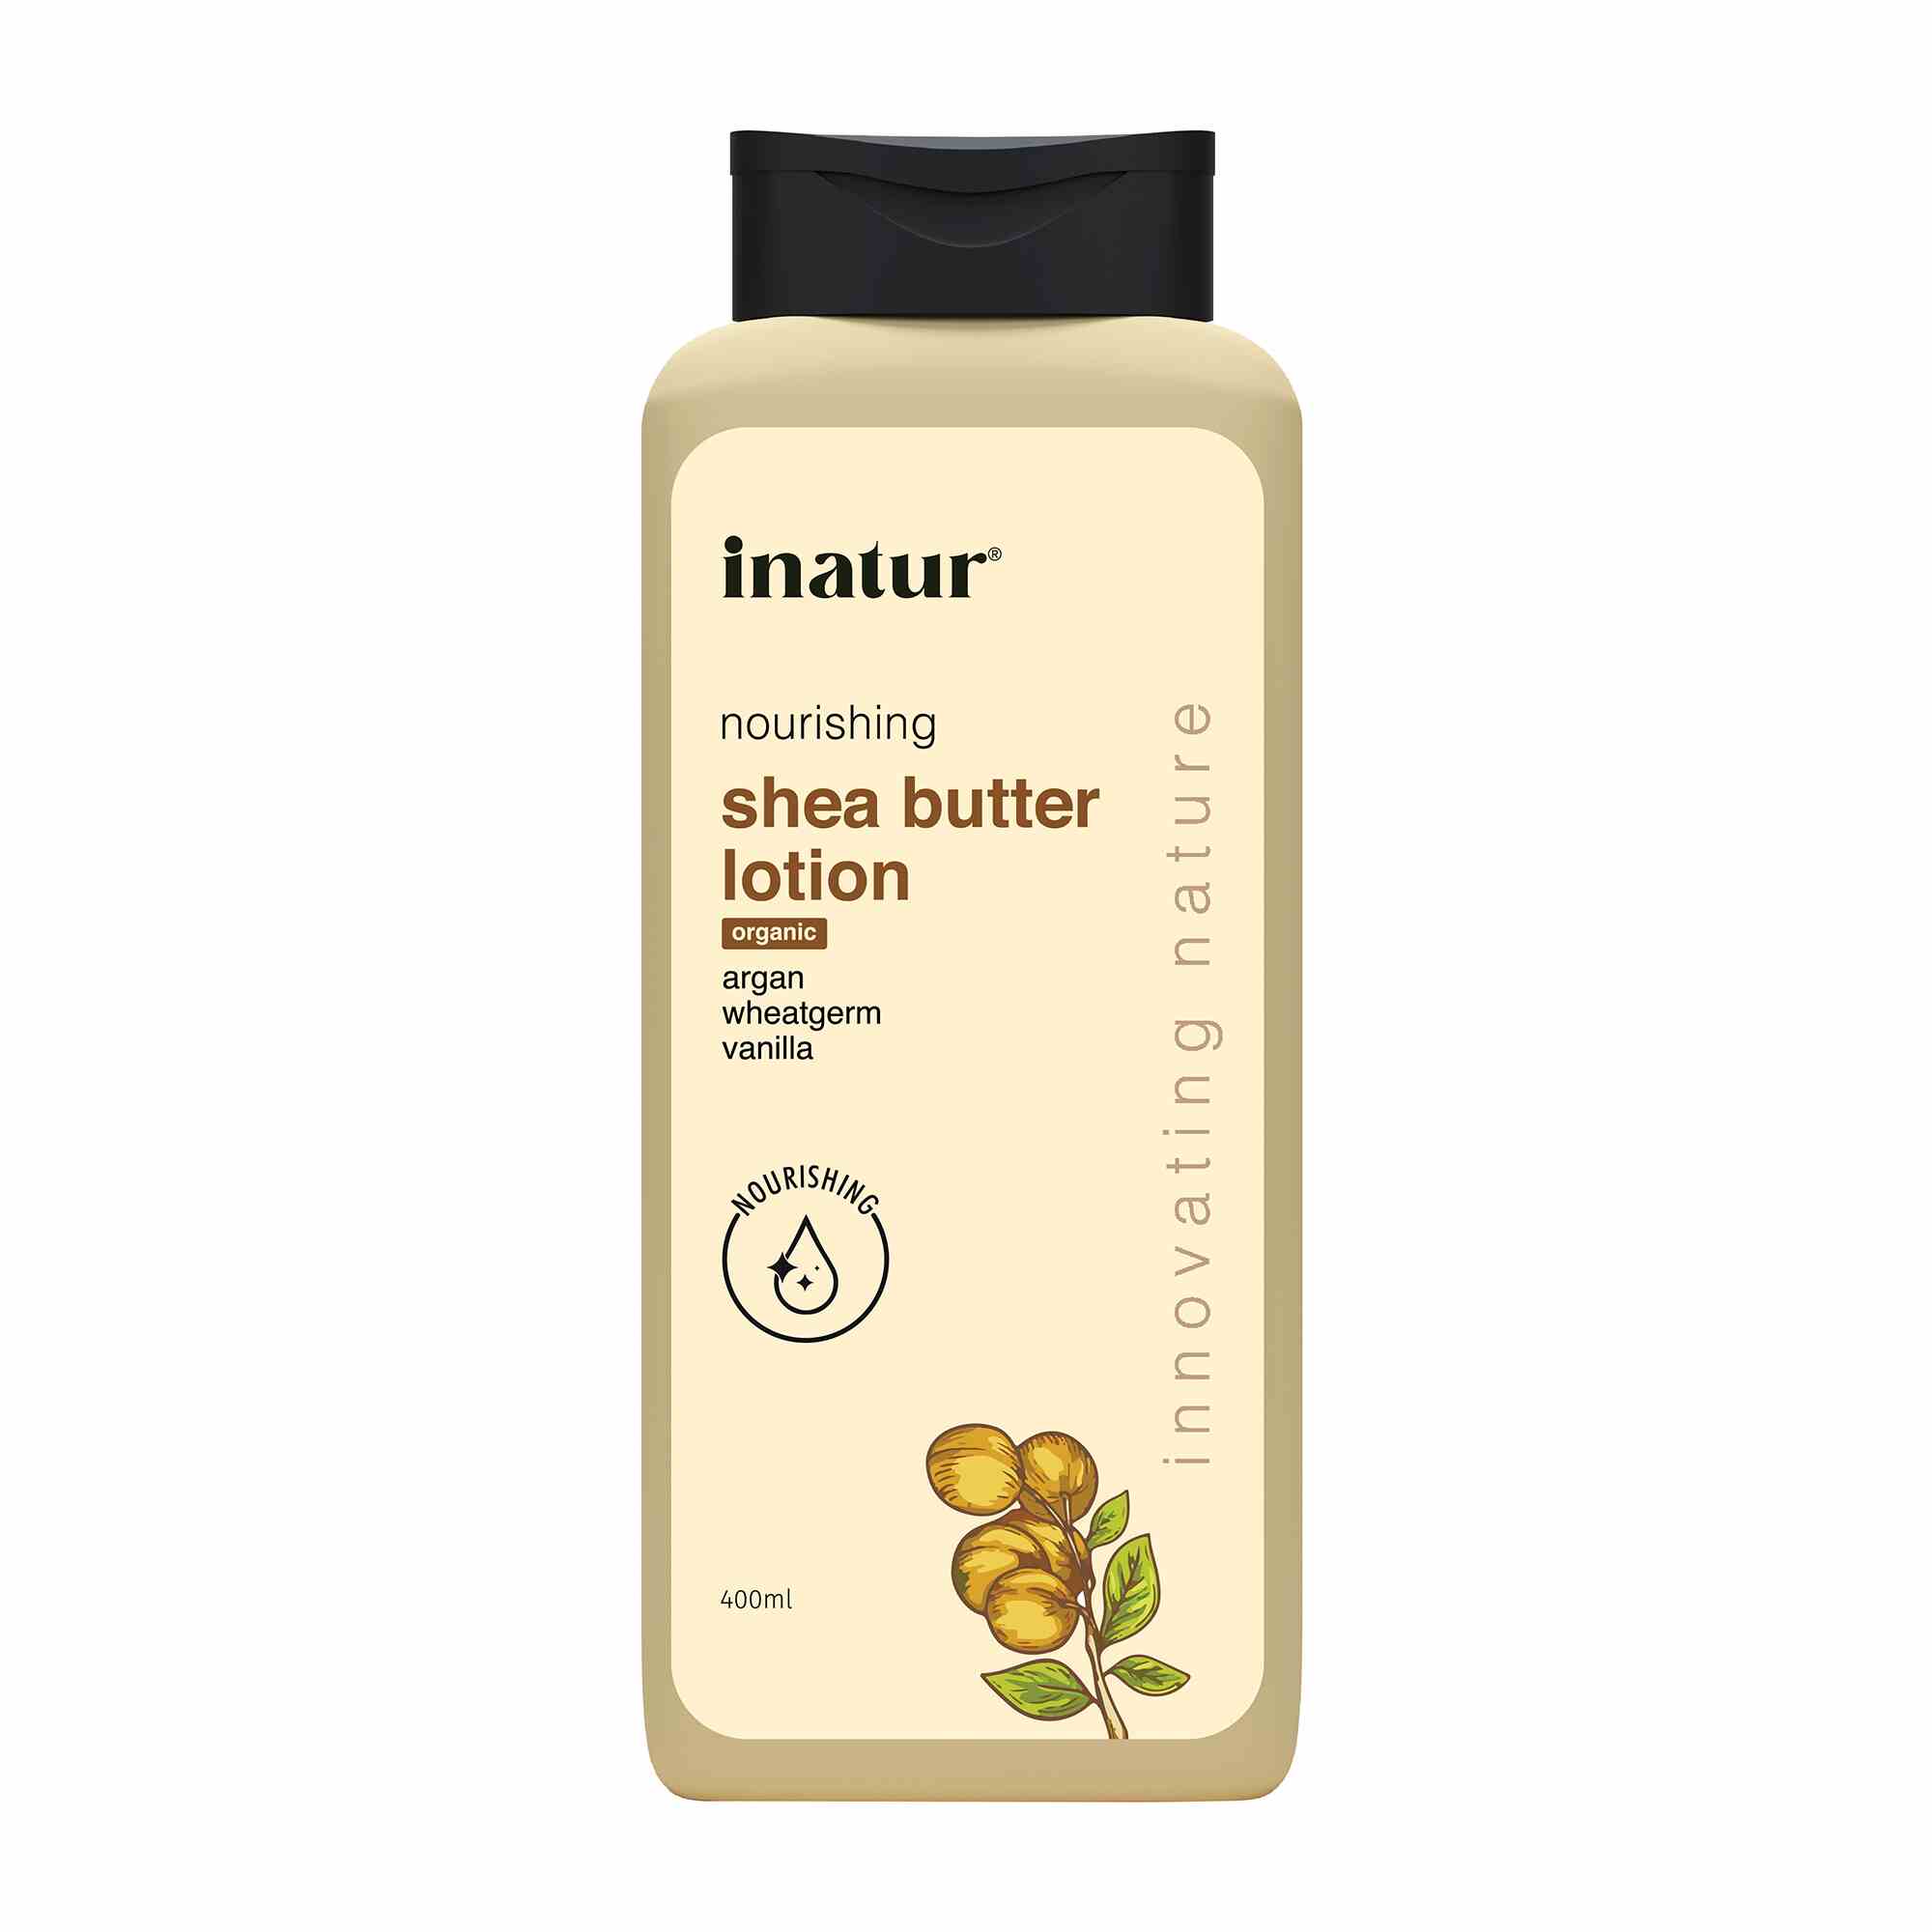 inatur sheabutter lotion